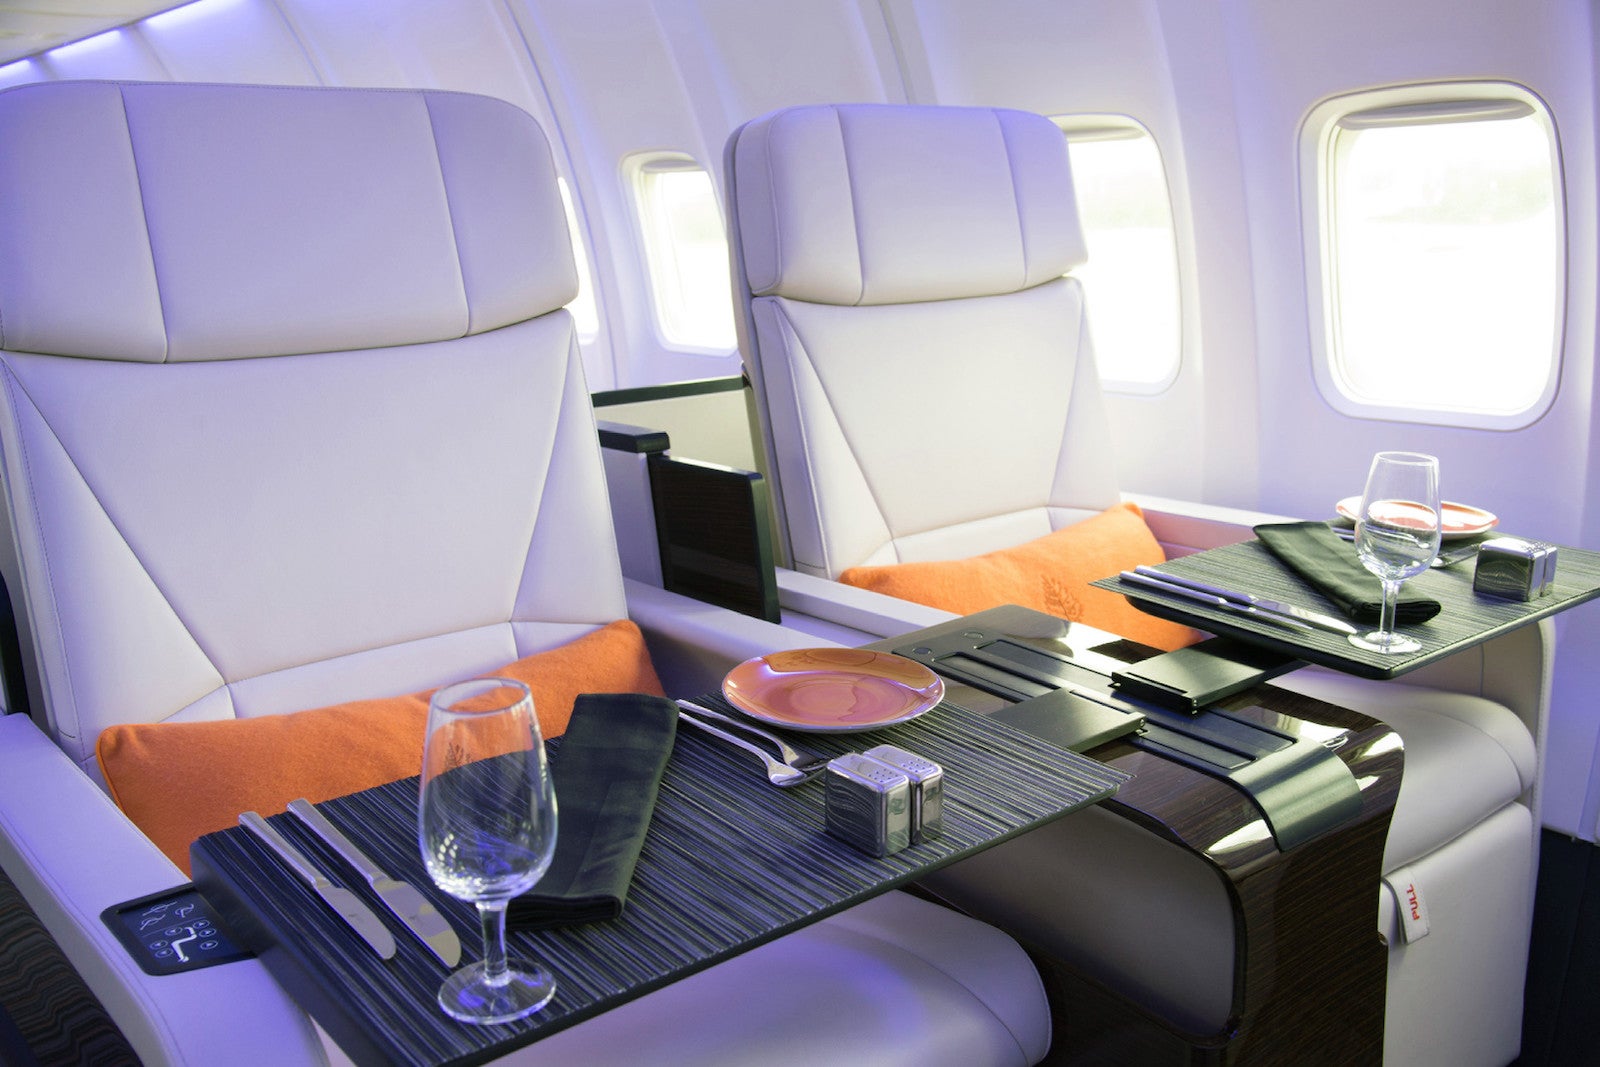 White leather airplane seats, foldout tables holding dishware